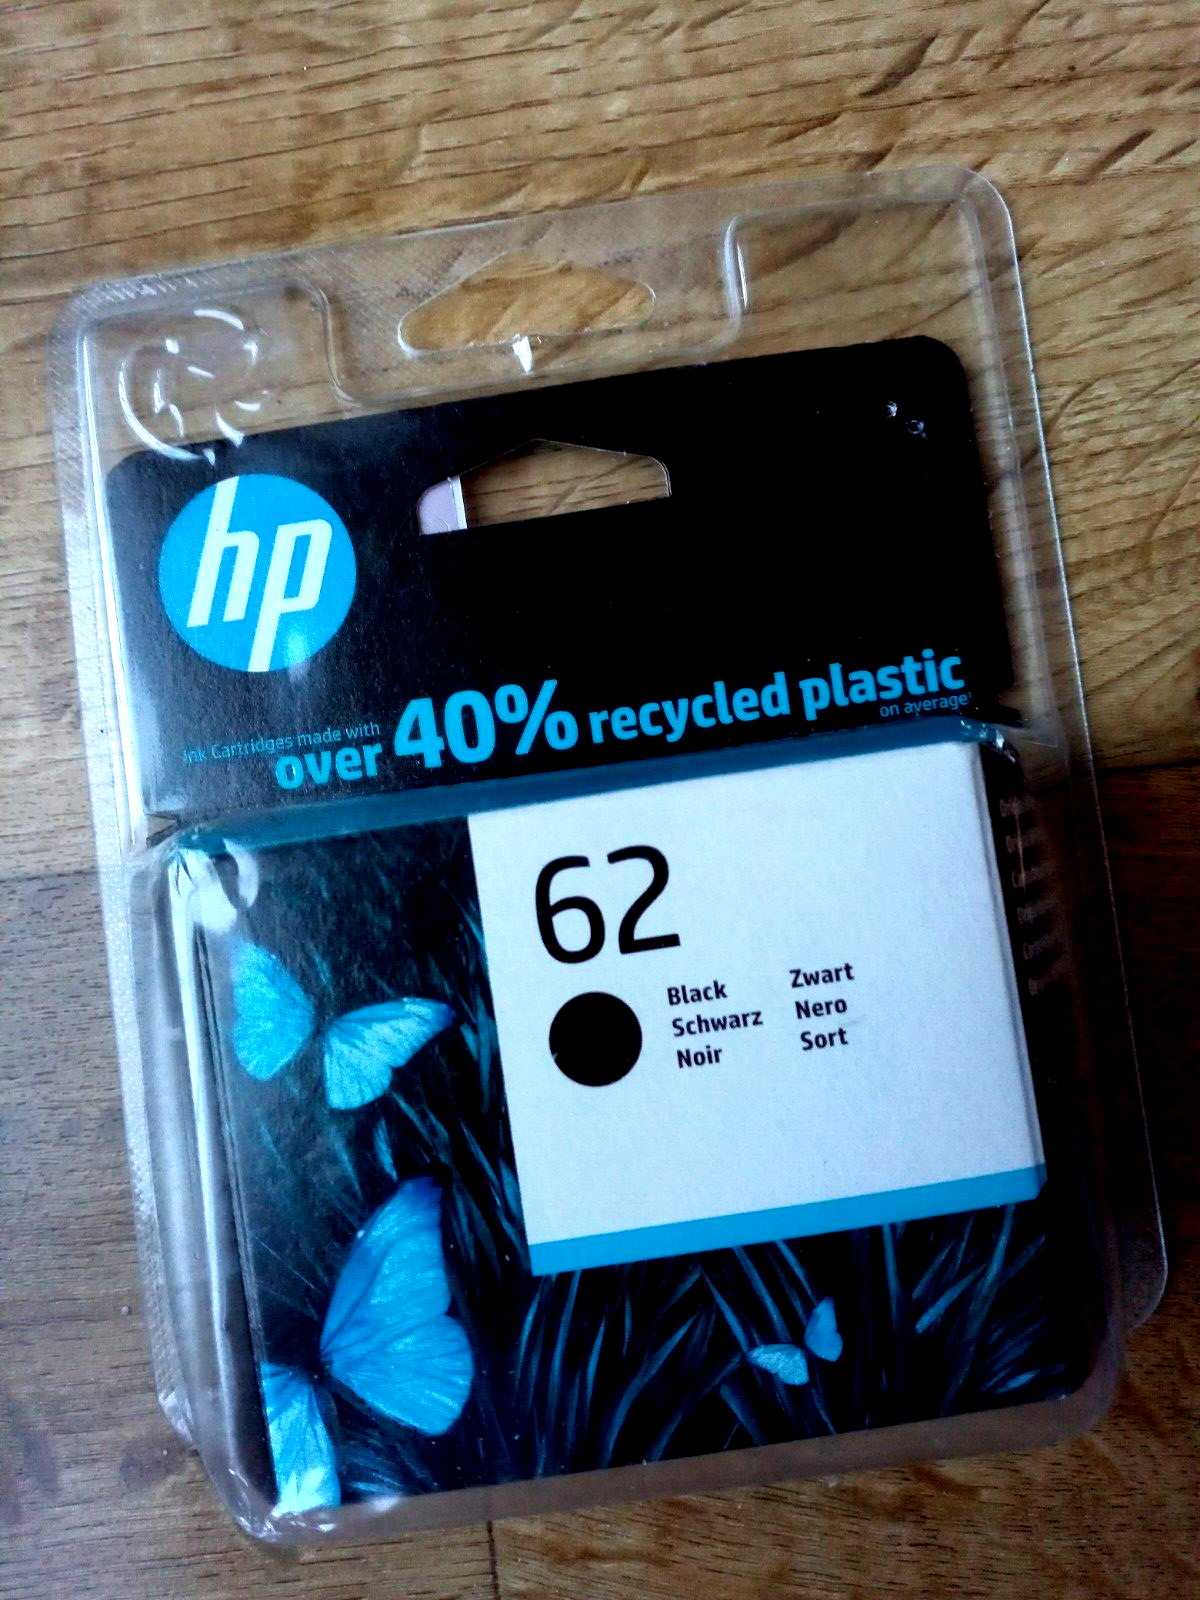 Cartouche Hp 303 Xl Pack pas cher - Achat neuf et occasion